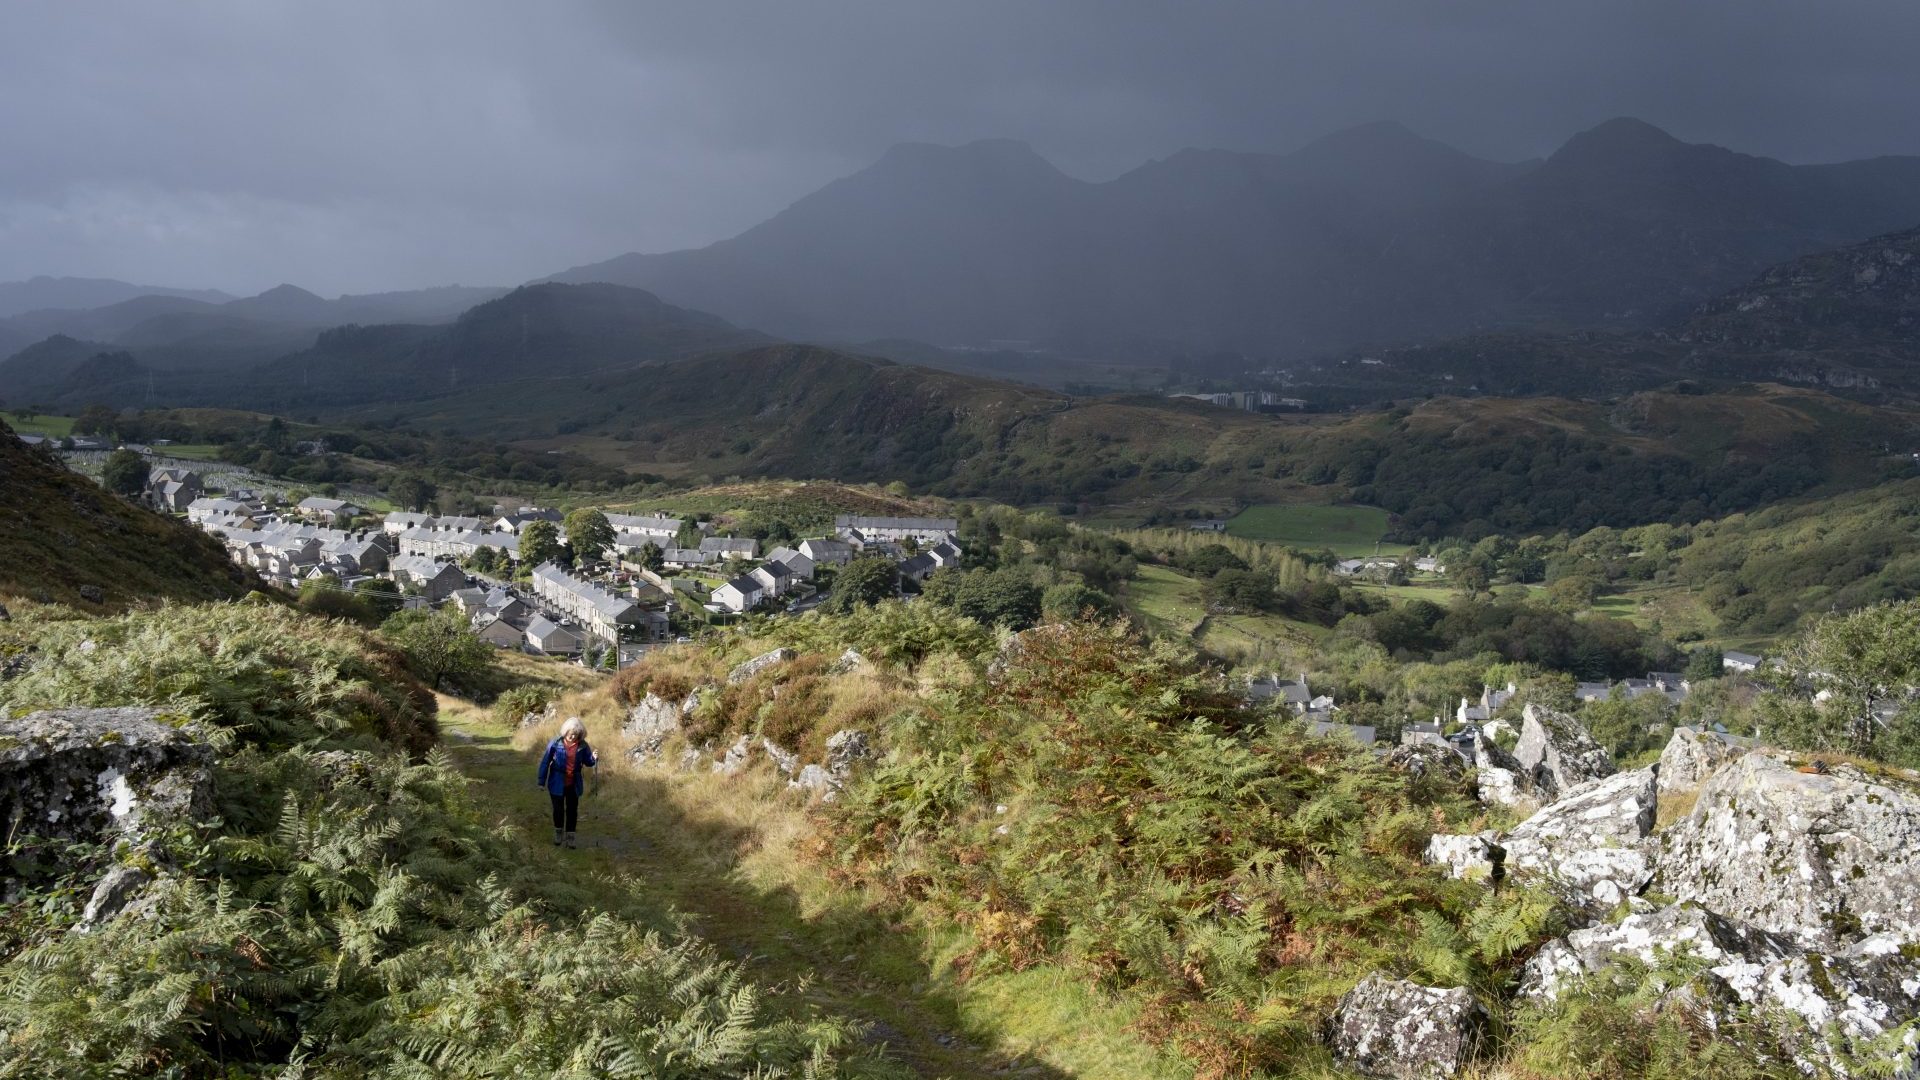 With dark skies approaching over distant mountains, a walker climbs a public footpath, once an industrial track for the slate mining industry. Photo: Richard Baker / In Pictures via Getty Images